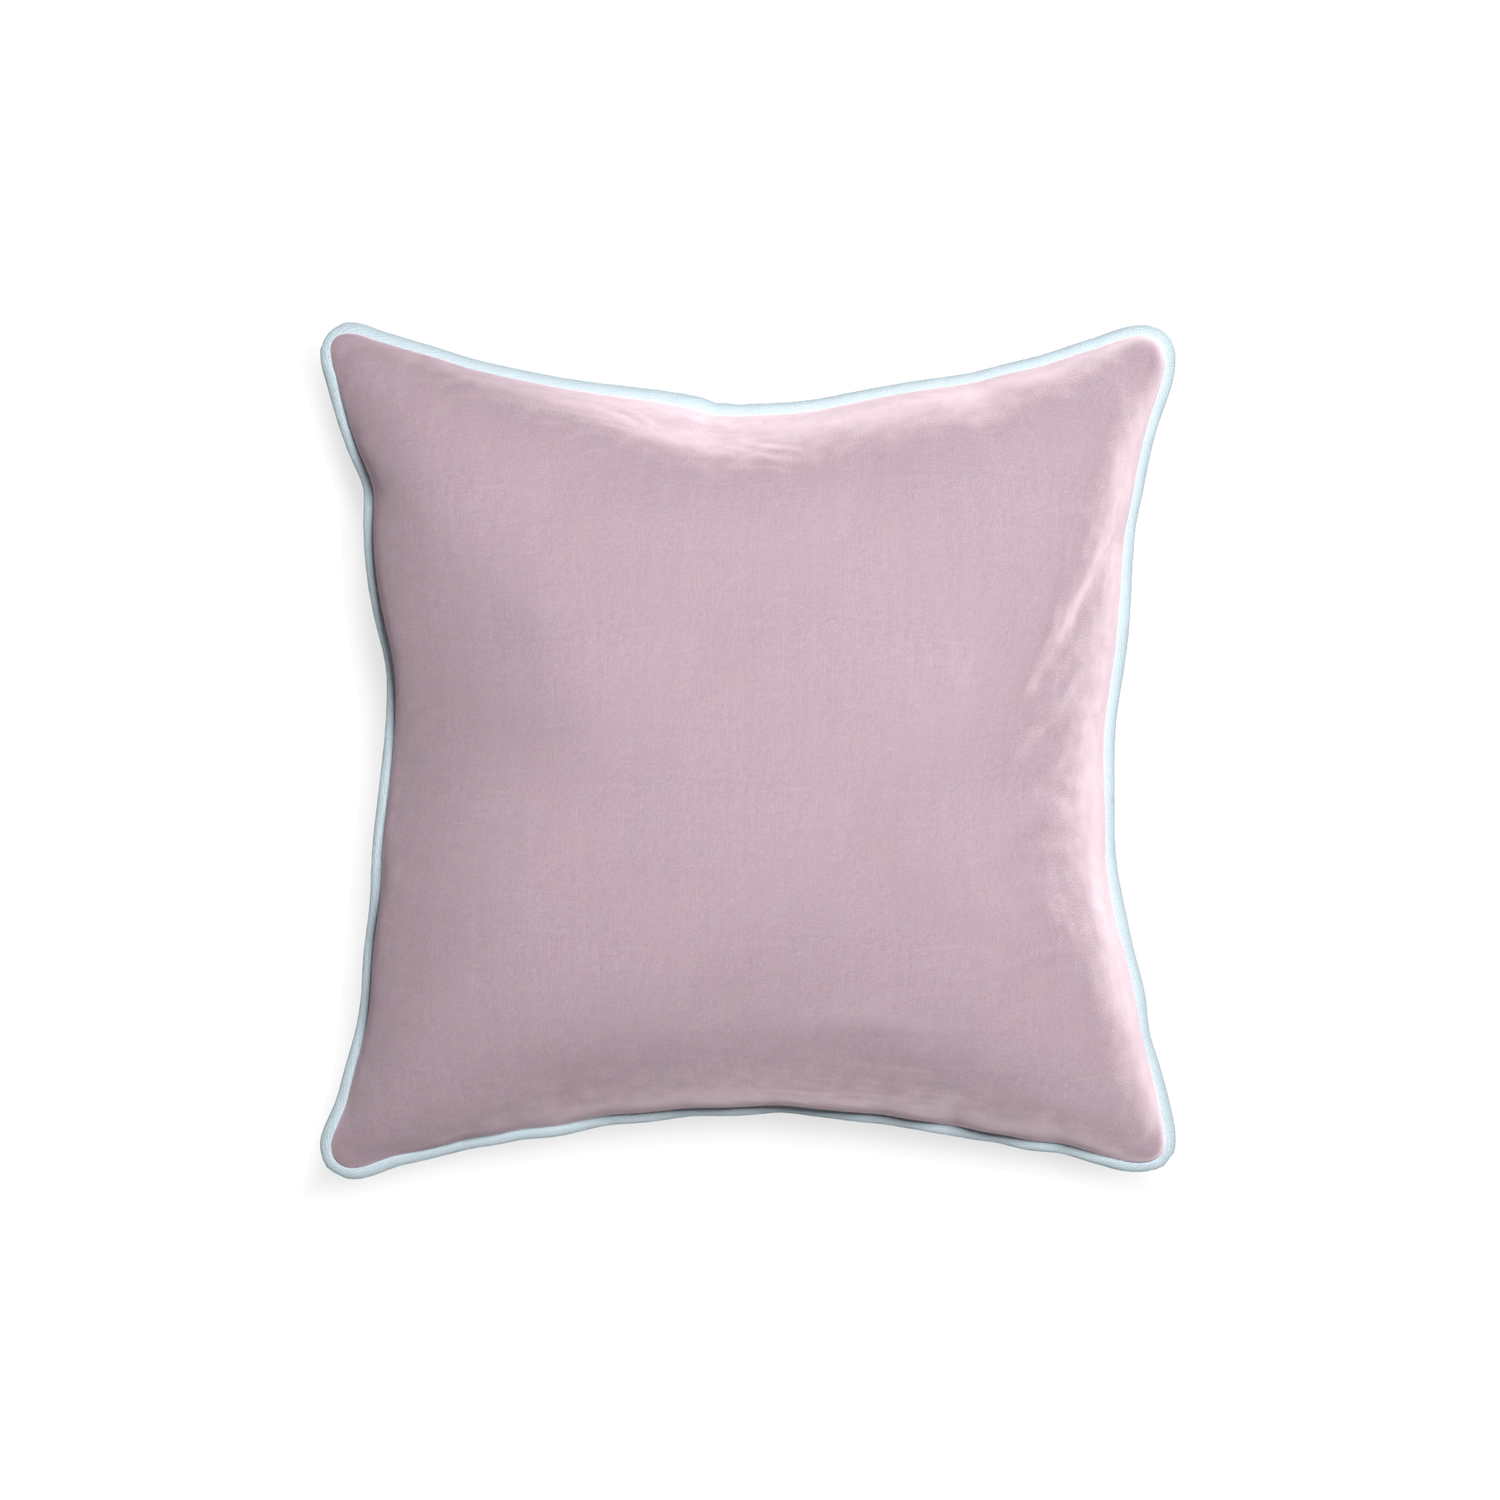 18-square lilac velvet custom lilacpillow with powder piping on white background